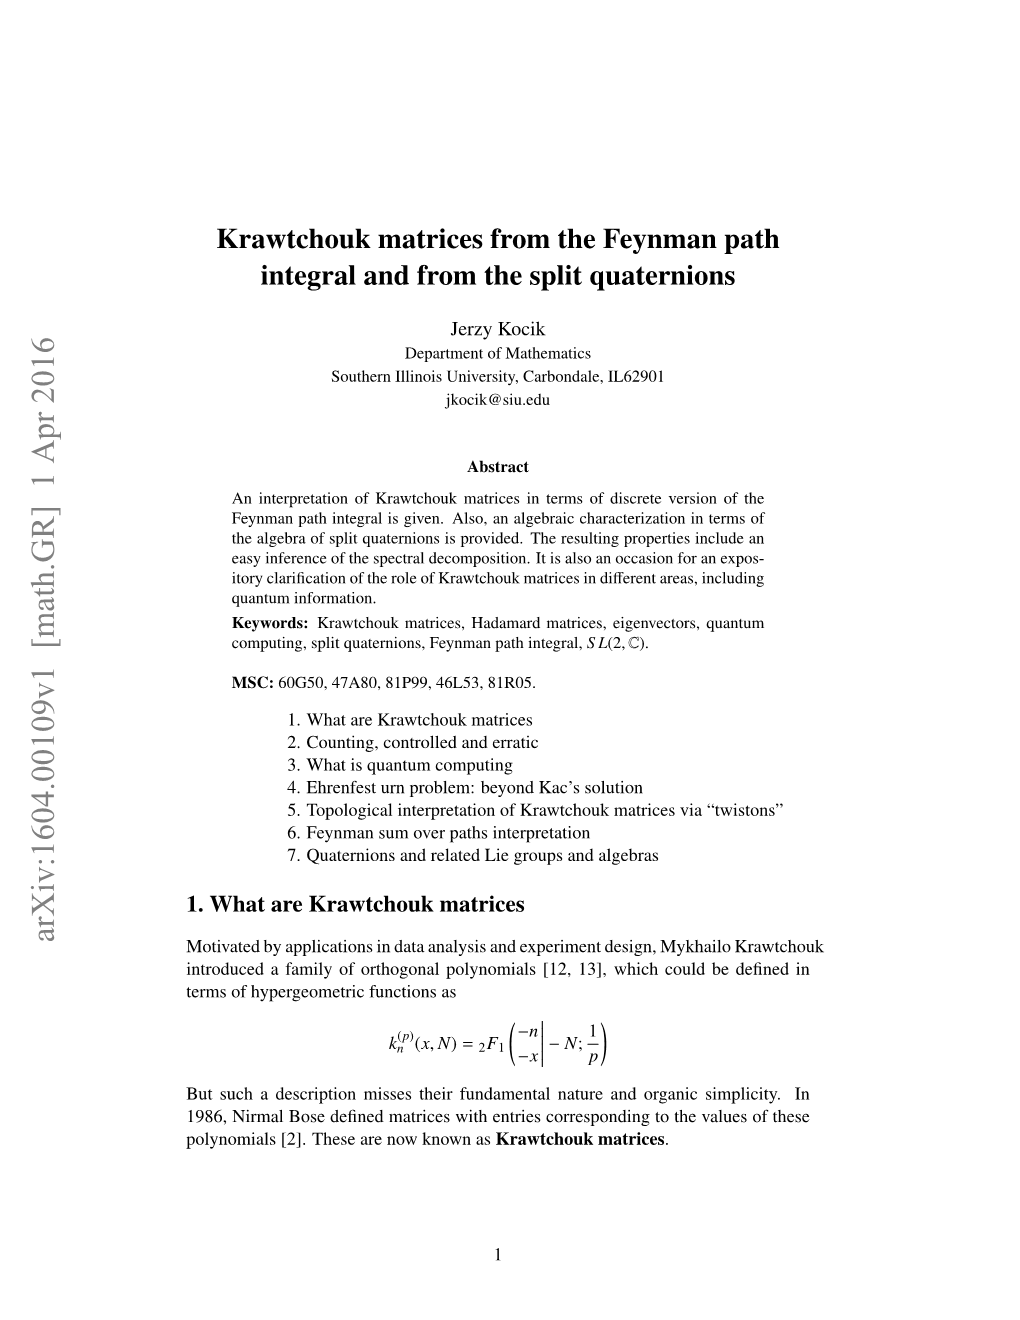 Krawtchouk Matrices from the Feynman Path Integral and from the Split Quaternions